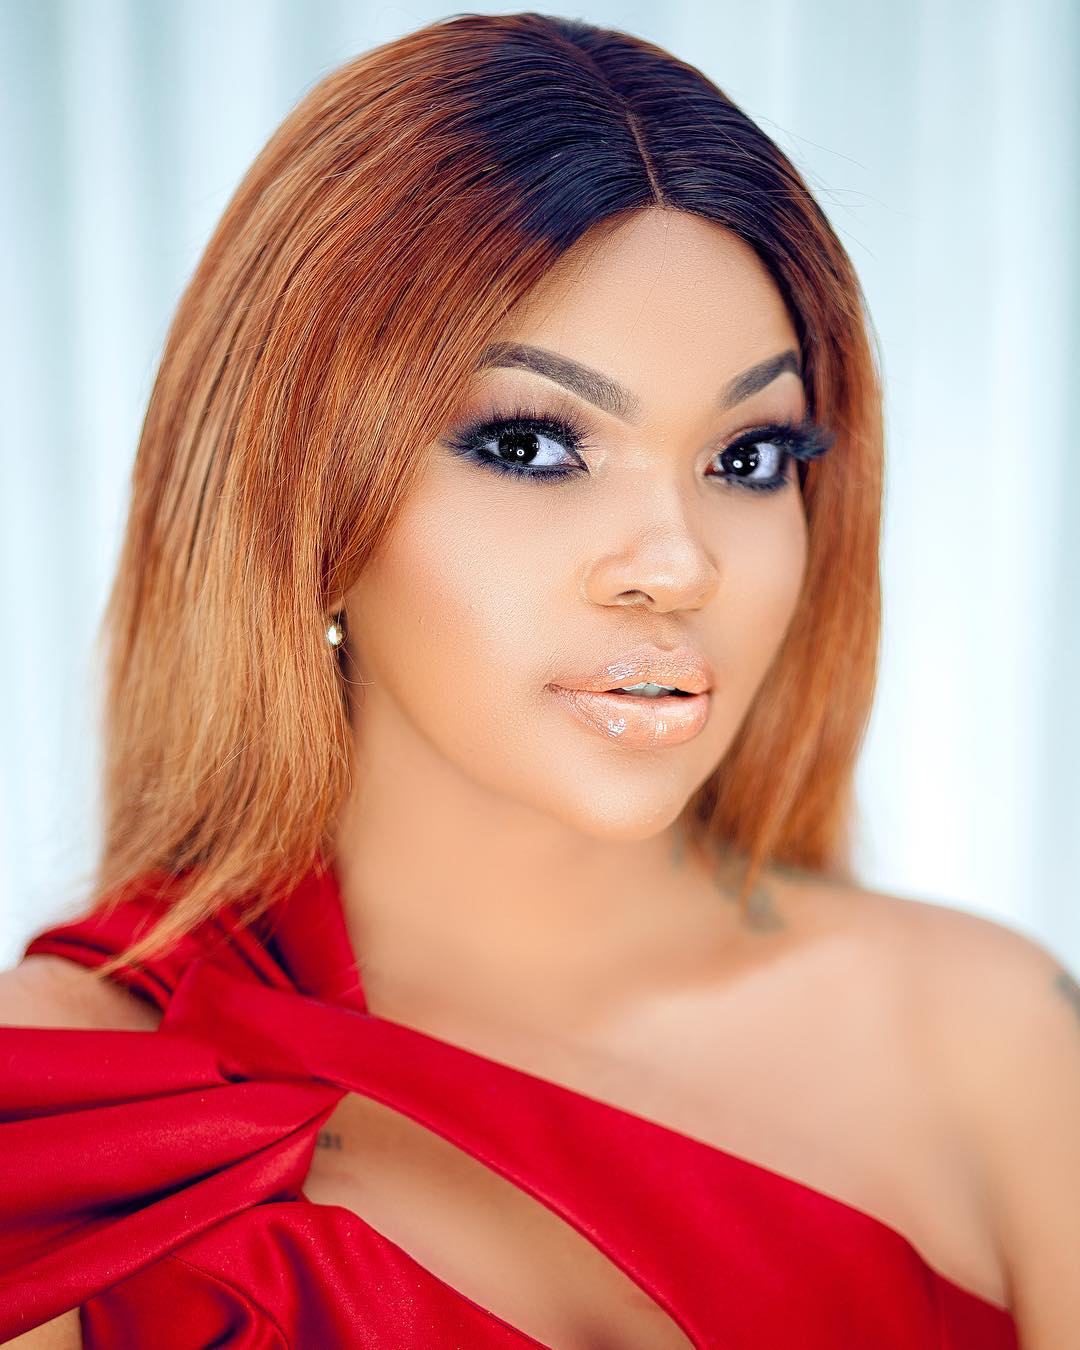 Diamond Platnumz's ex-girlfriend, Wema Sepetu shares raunchy photo of  herself and a man in bed following 'romping session' - YabaLeftOnline